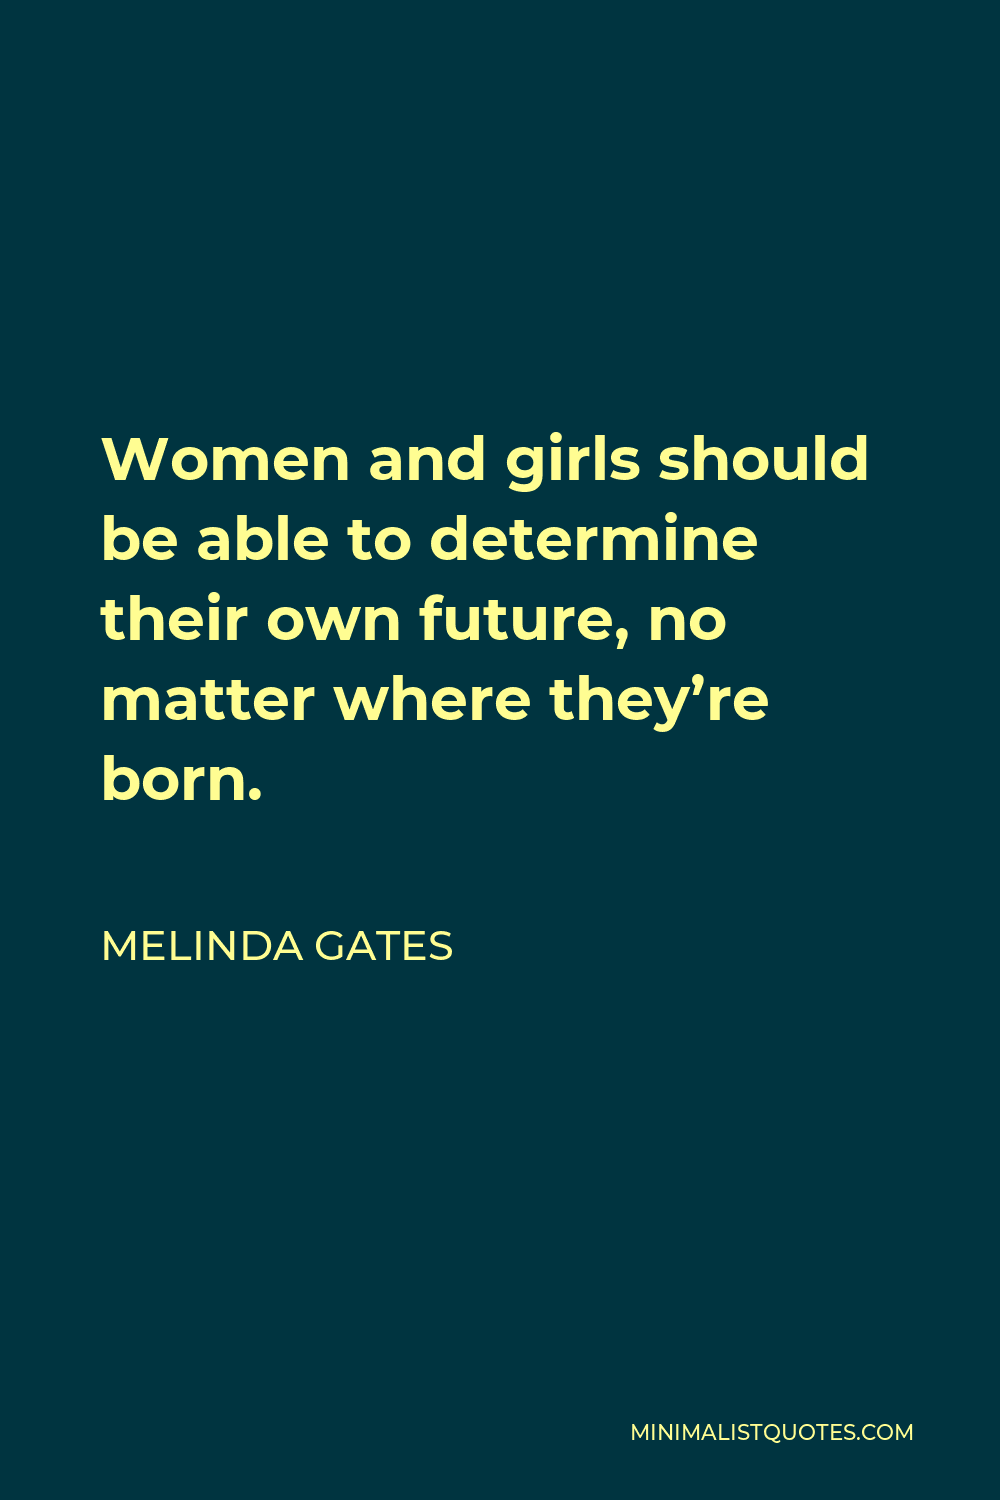 Melinda Gates Quote - Women and girls should be able to determine their own future, no matter where they’re born.